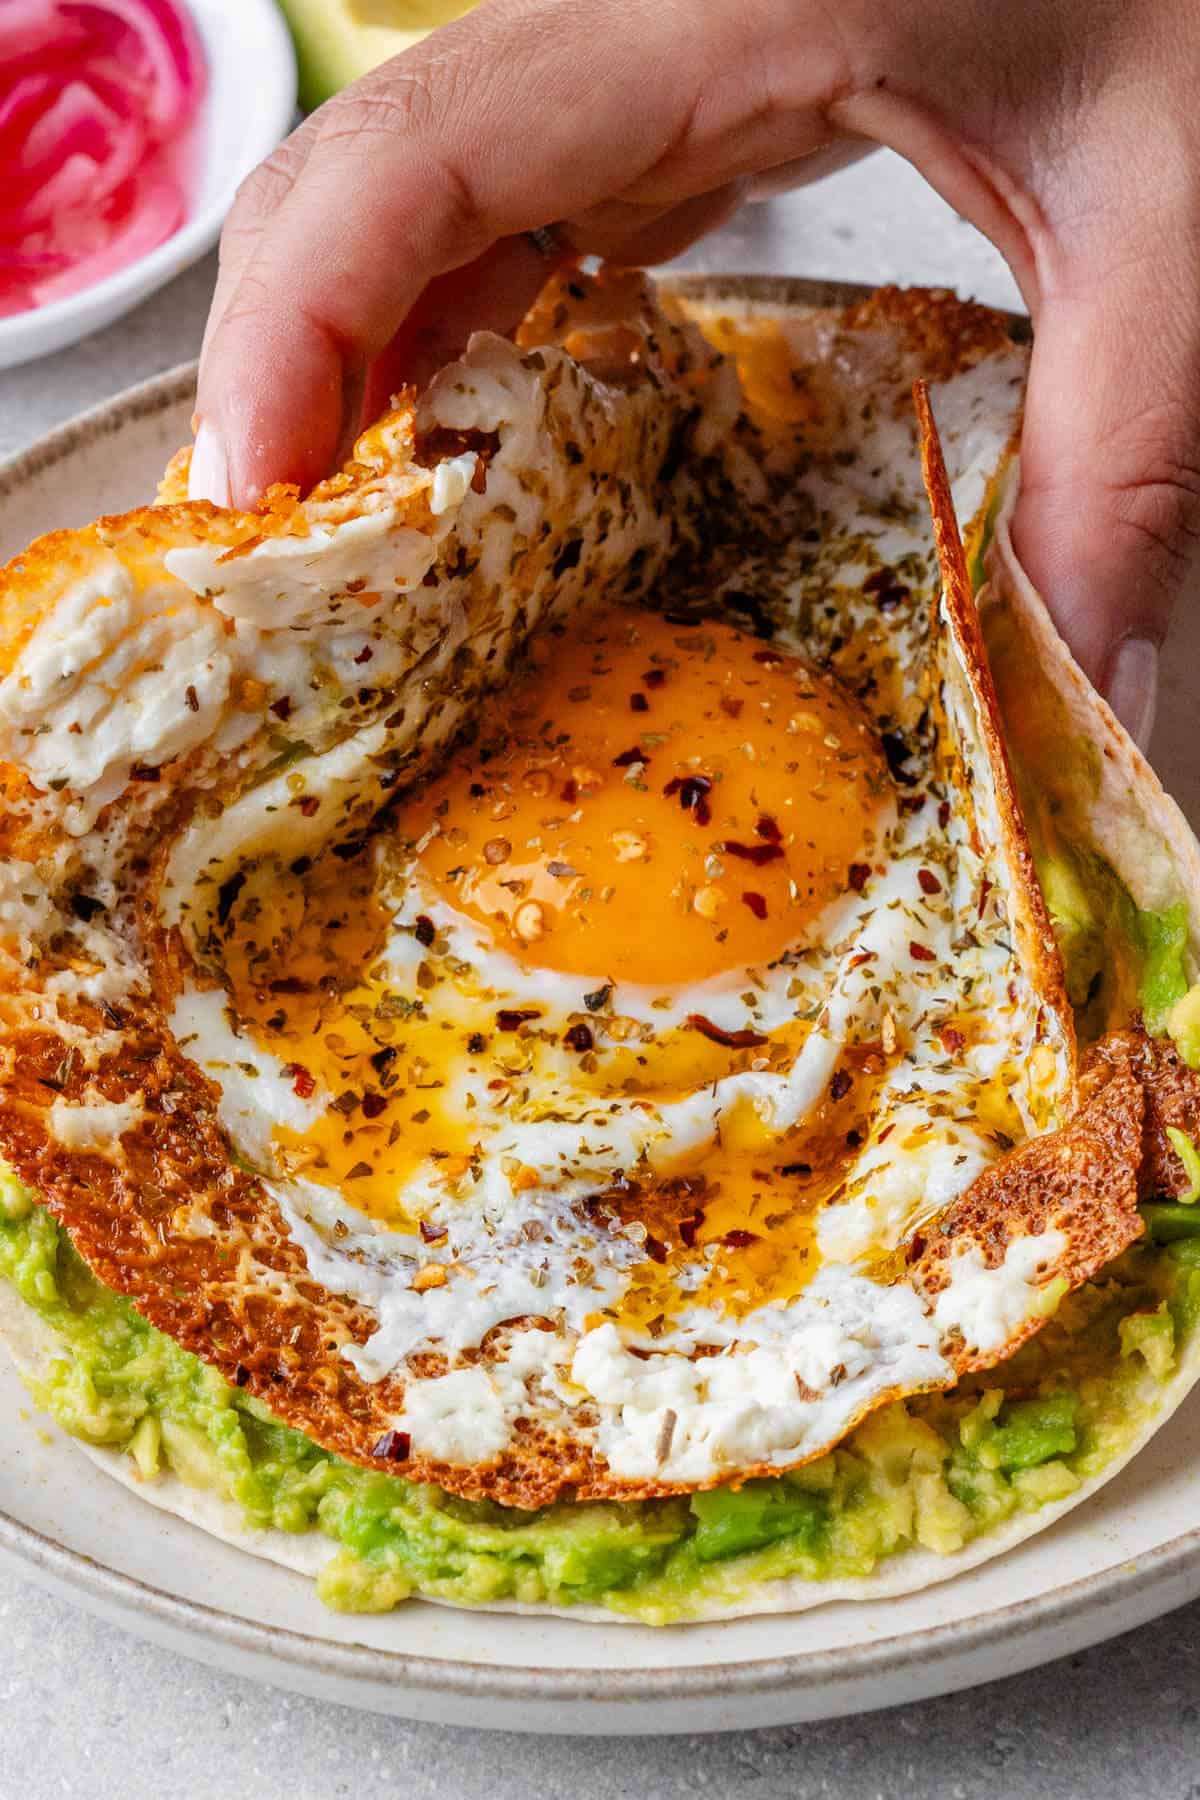 Tortilla with a feta fried egg being picked up